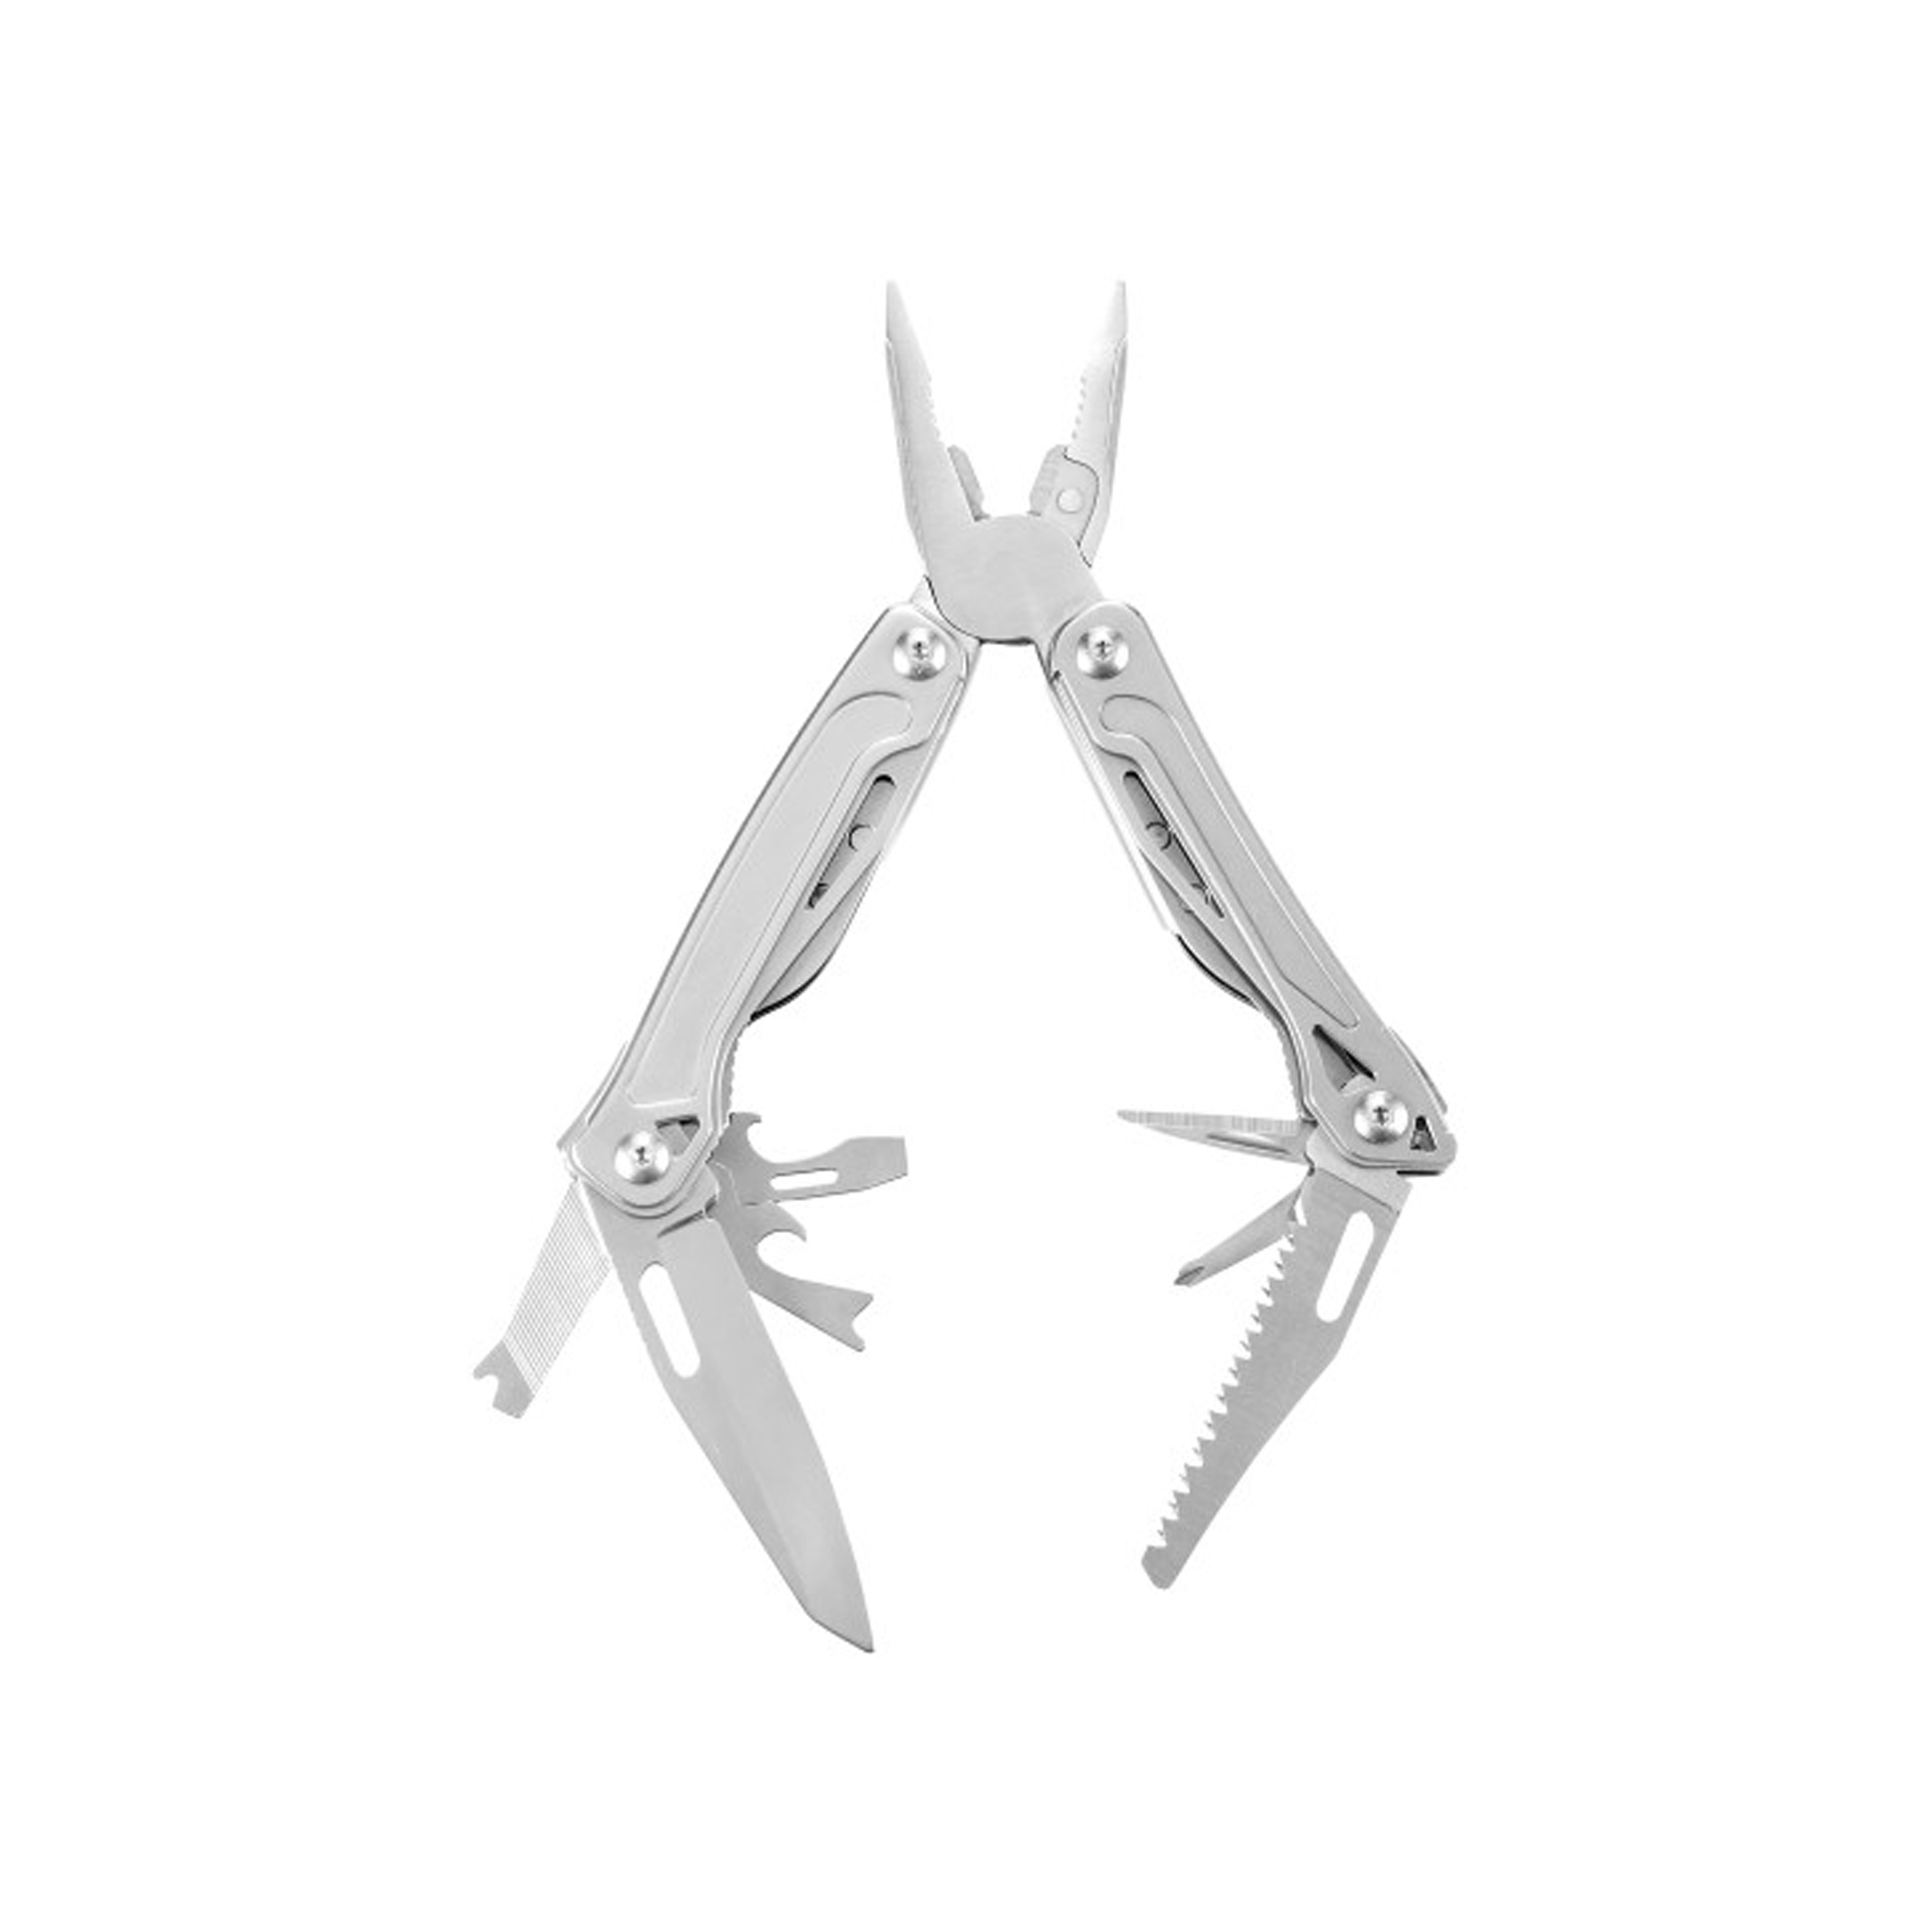 Multitool-Stainless-Steel-_Quantum_-inkl.-Clip-1.png